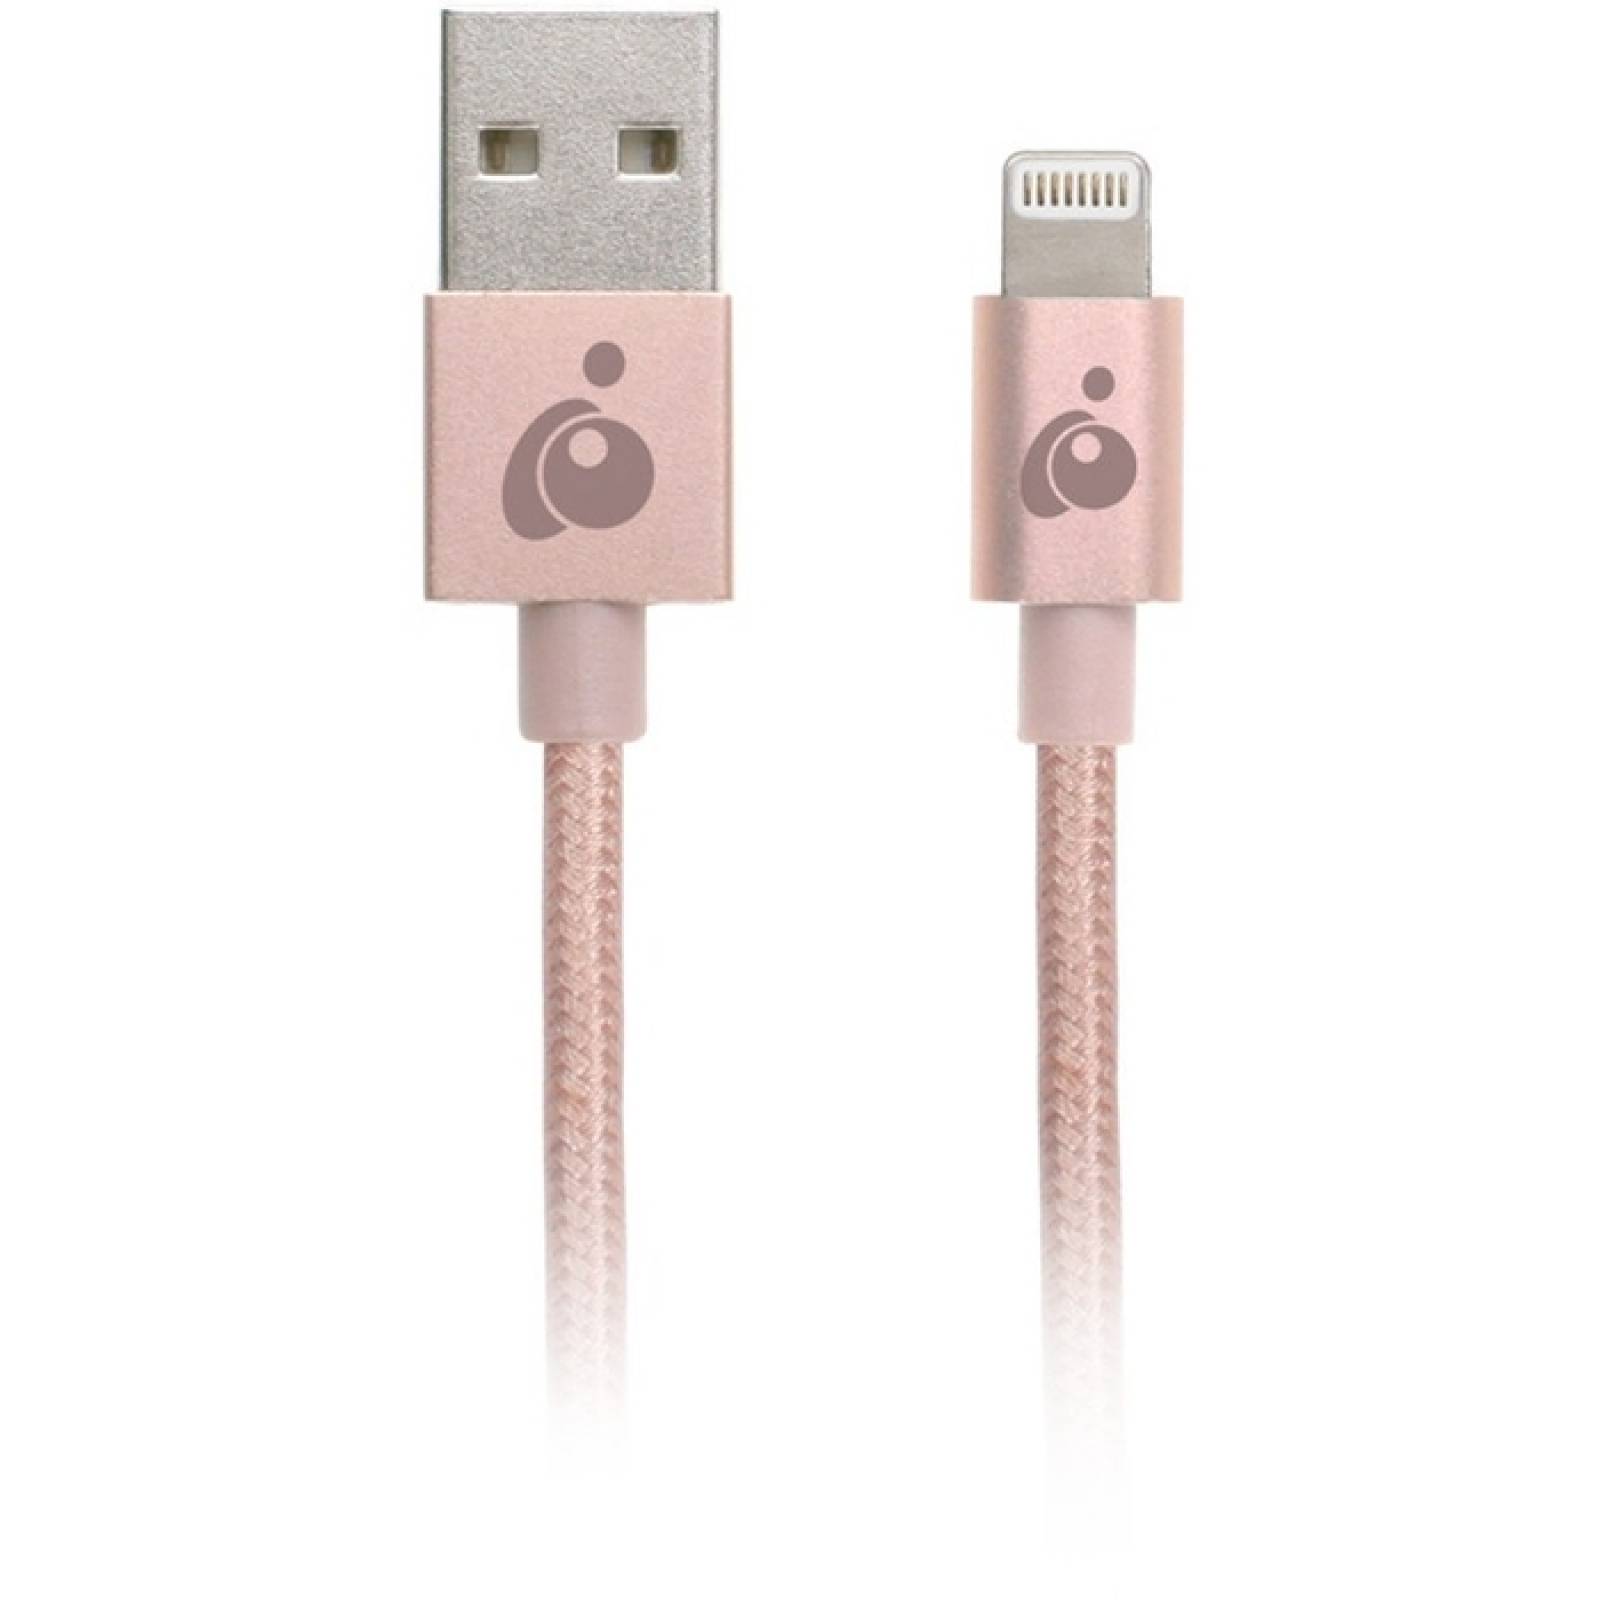 IOGEAR Charge amp Sync Flip ProReversible USB a Lightning Cable 33 ft (1 m) Rose Gold